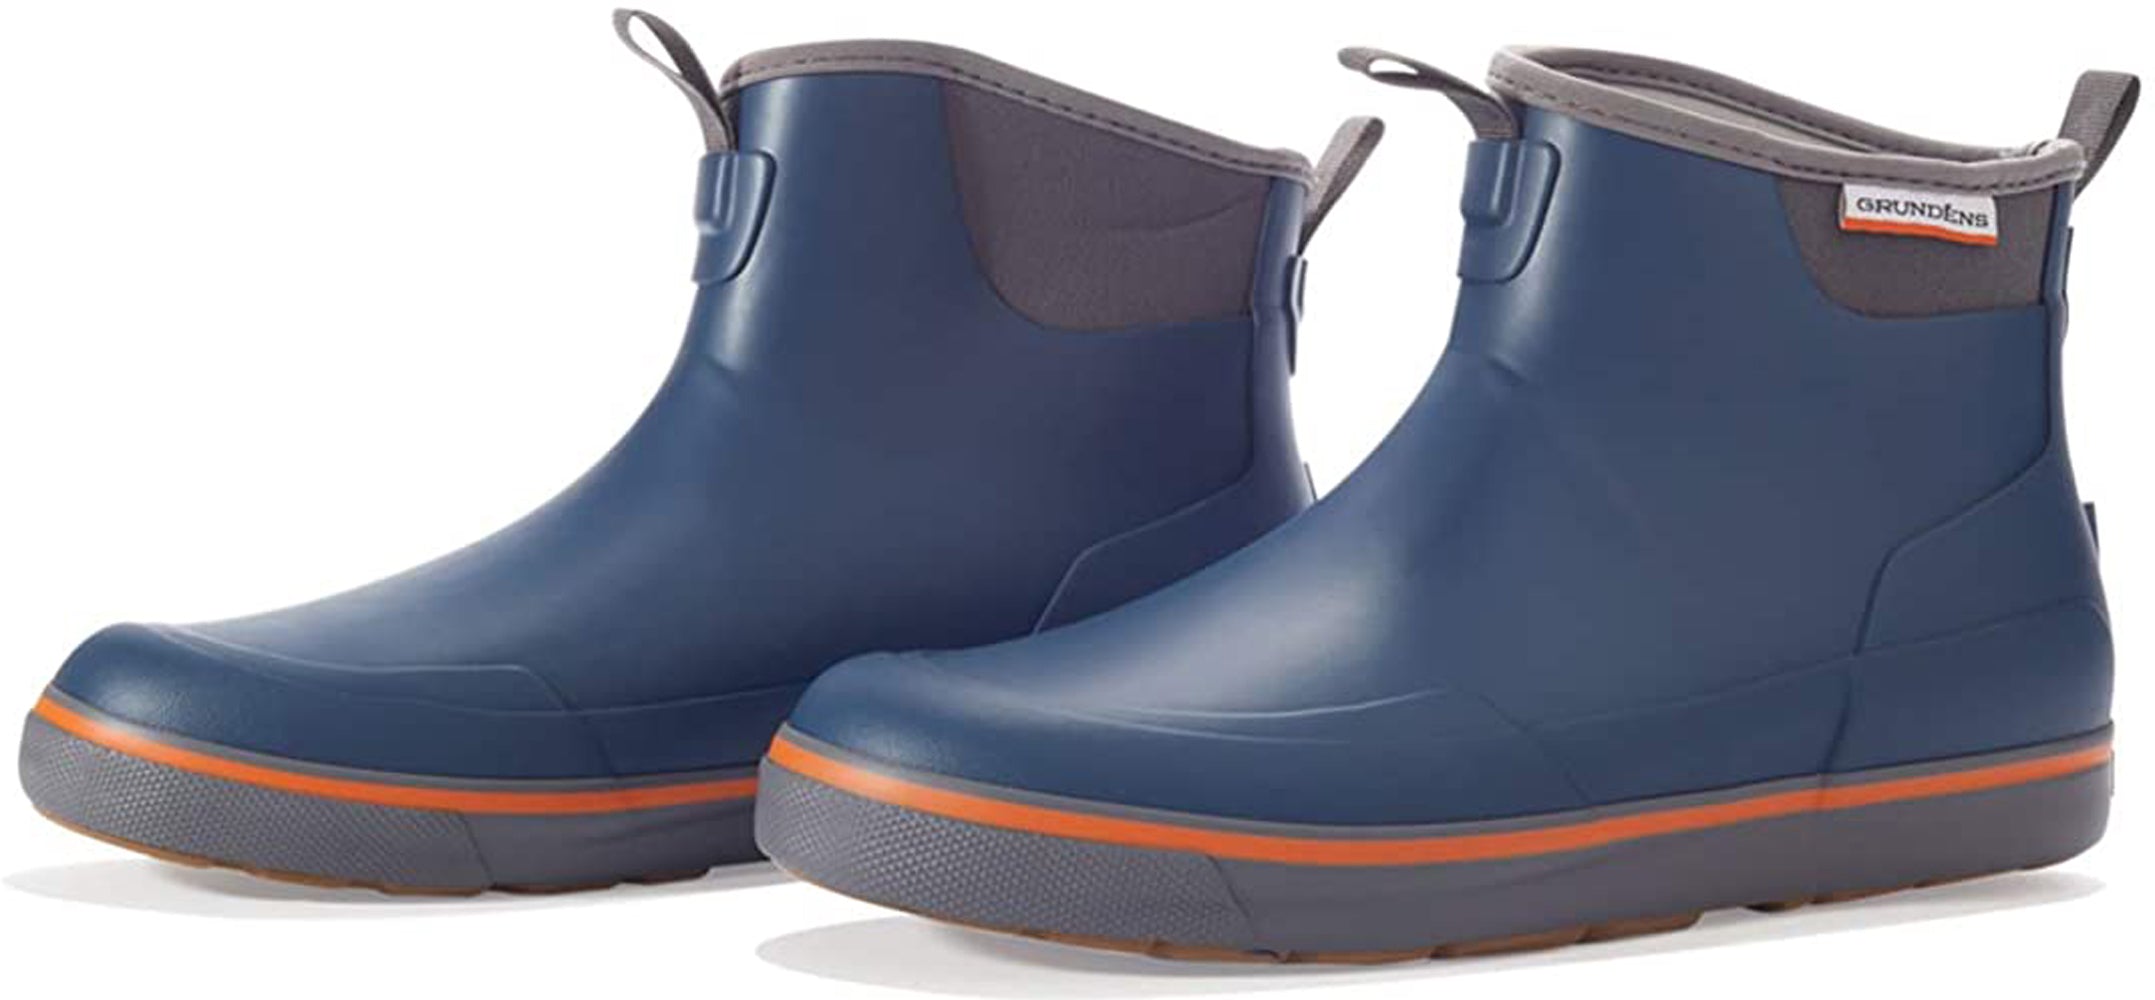 Deck-Boss Ankle Boot in Deep Water Blue color from the side view